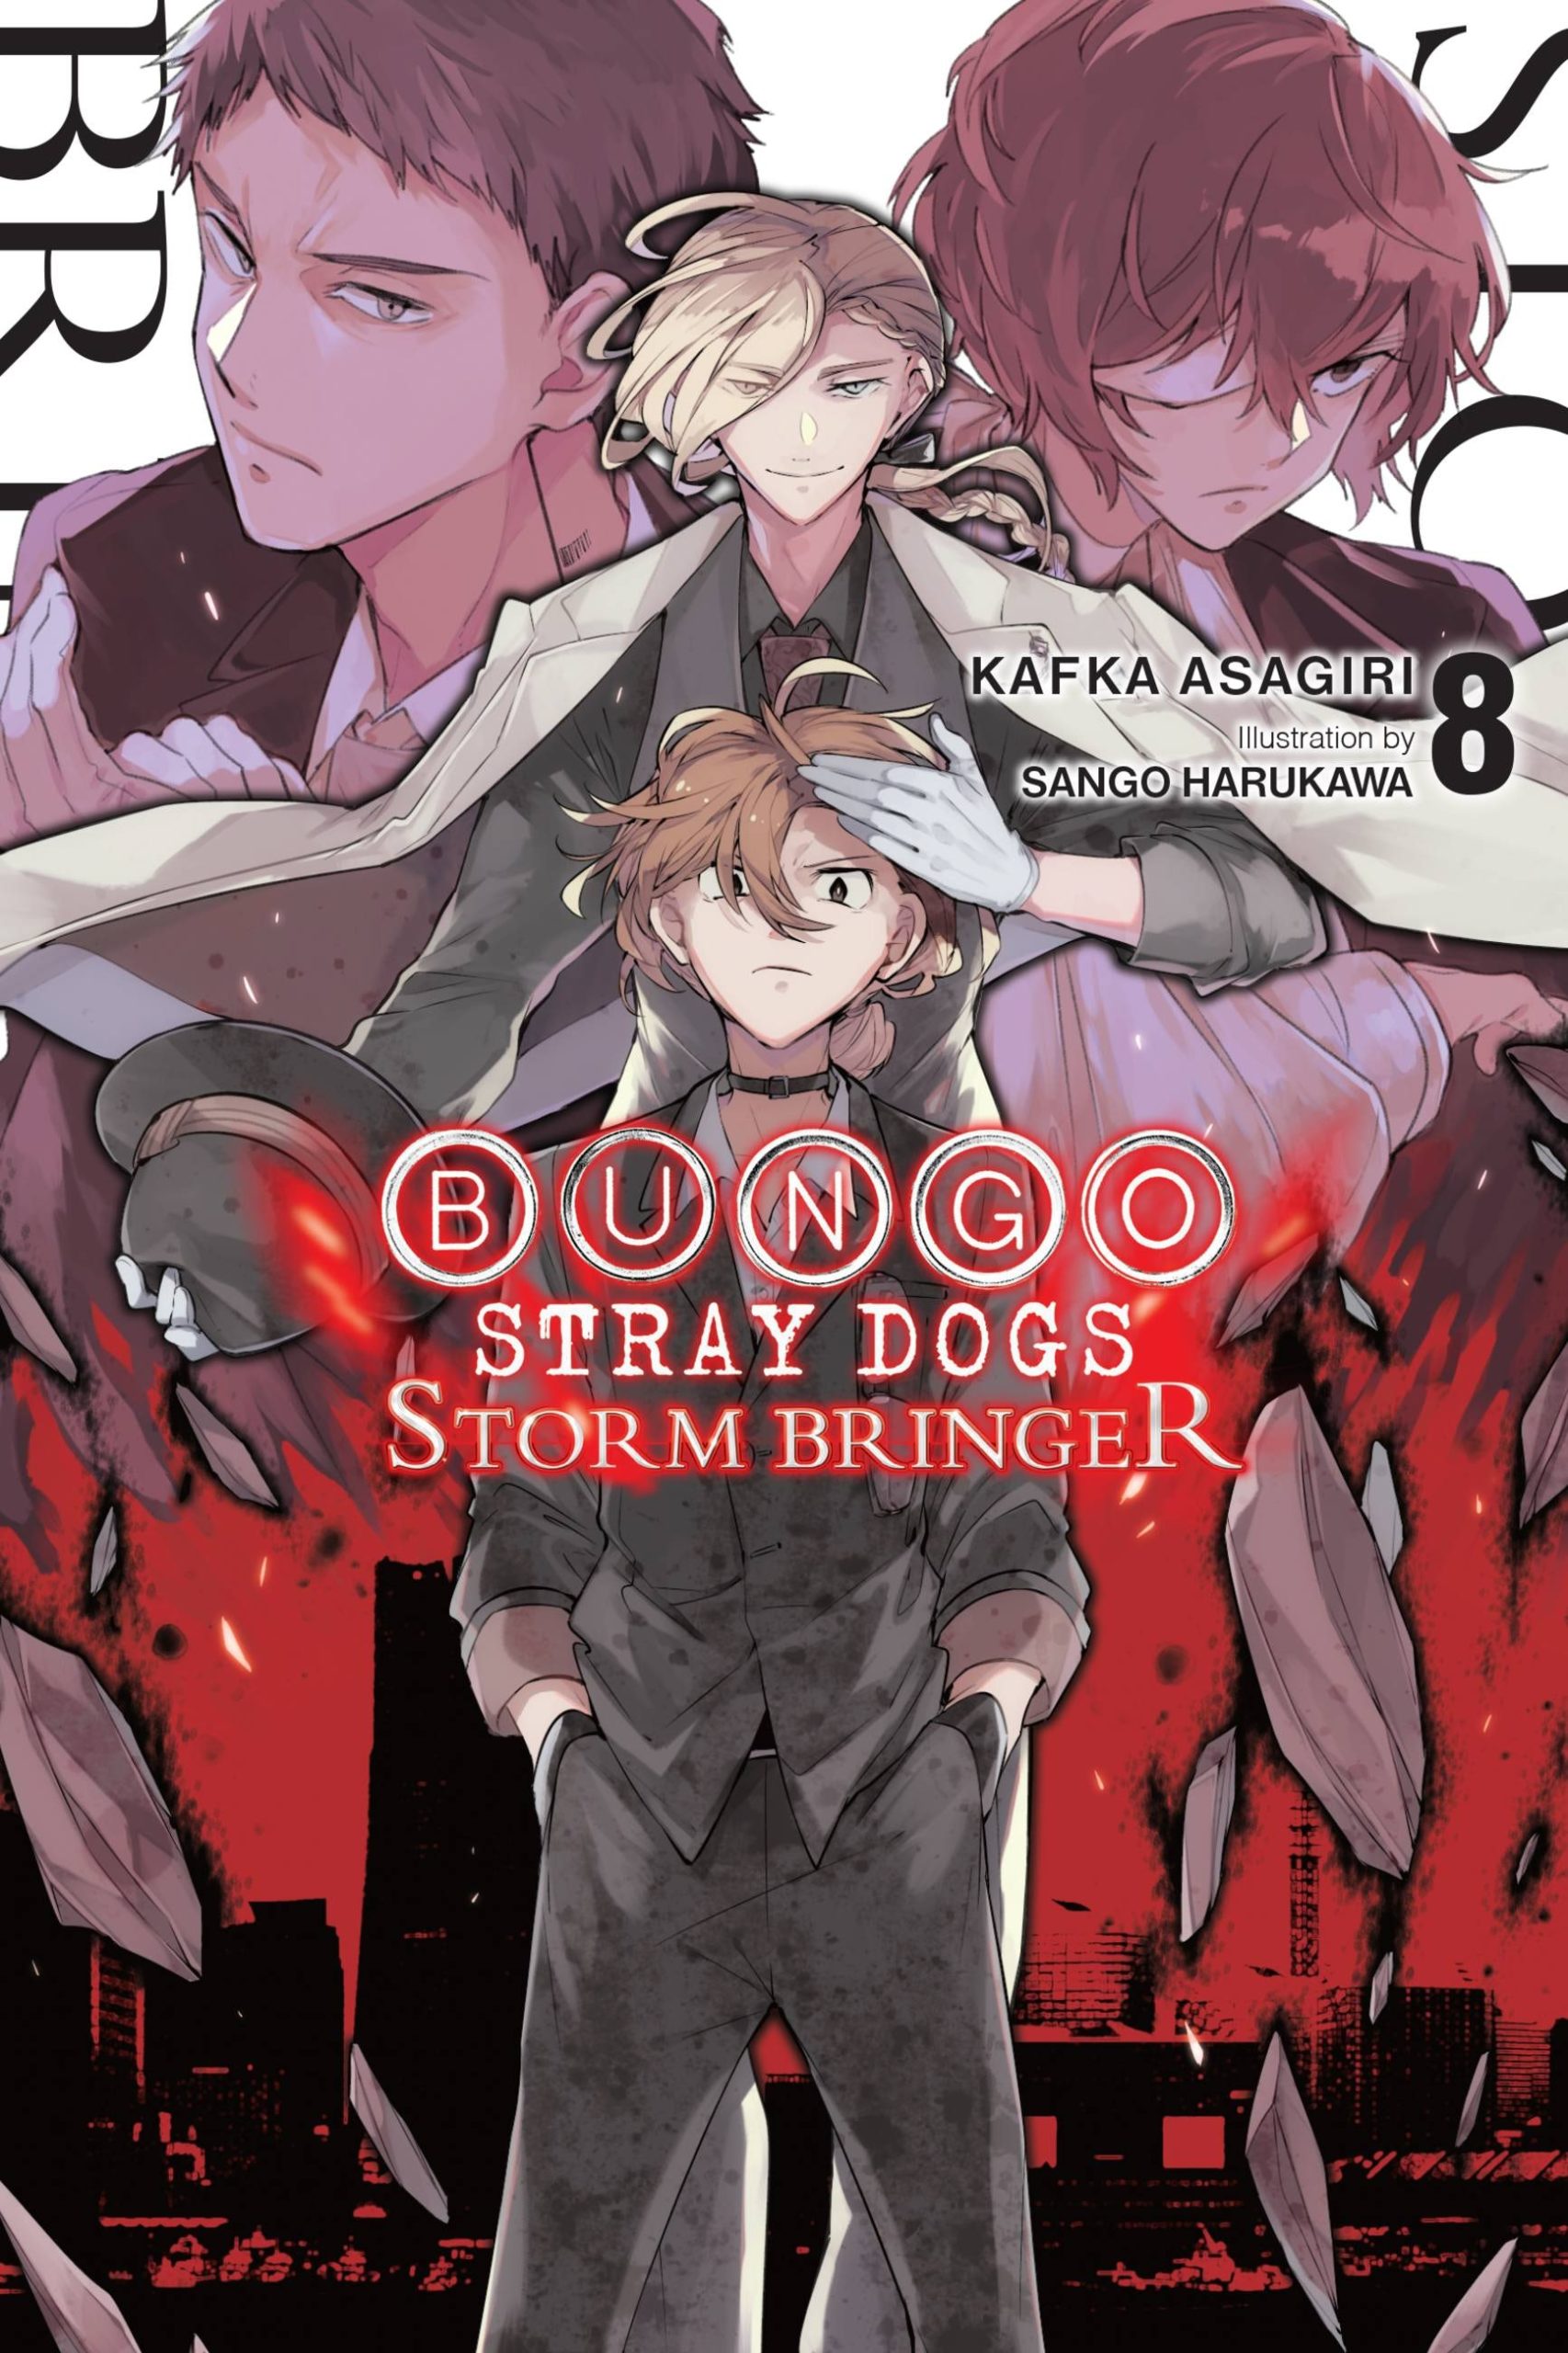 Top 10 Anime Like Bungou Stray Dogs  Where to Watch Them